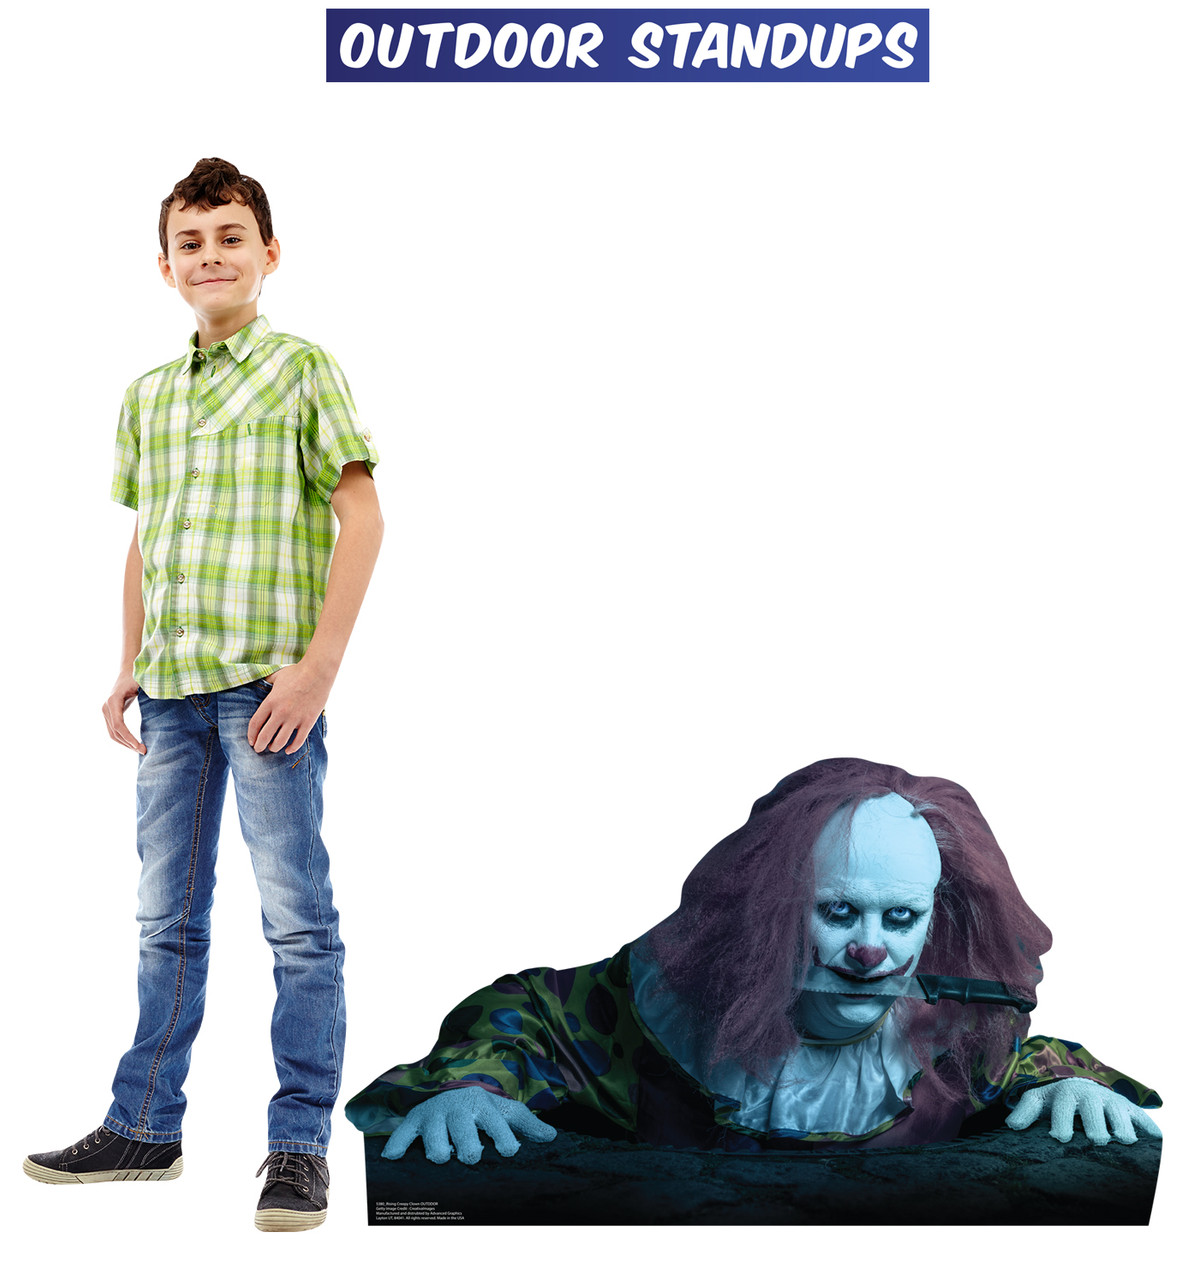 Rising Creepy Clown Outdoor Standee with model.